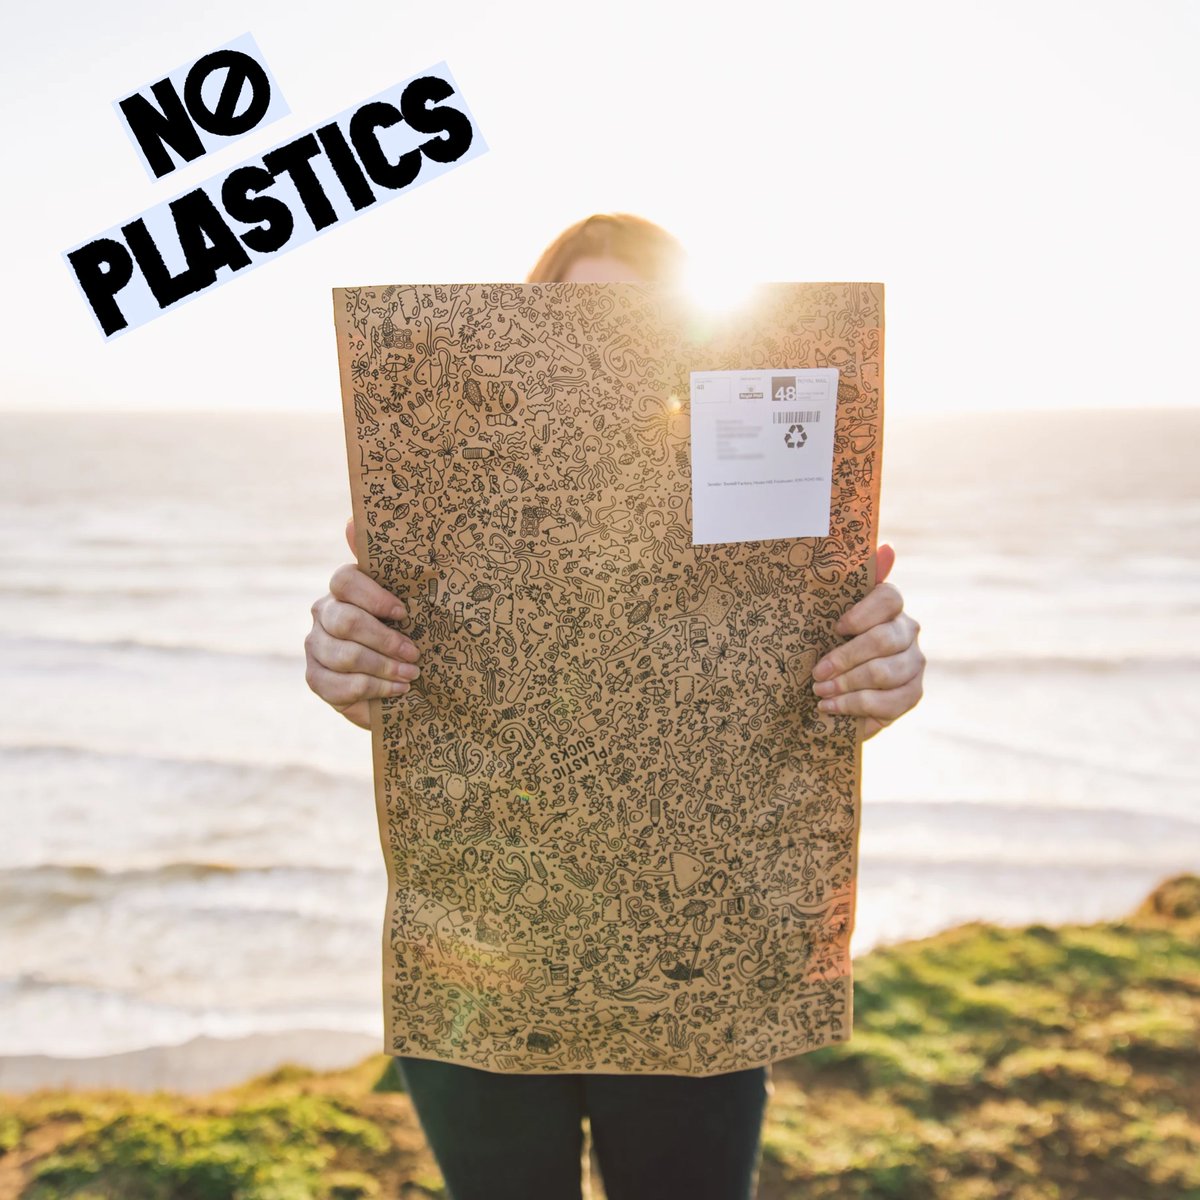 Instead of plastic packaging, we use a rip and splash-proof mailer bag made out of paper. Larger orders come in cardboard boxes, with paper-based tape.

#plasticfree #noplastics #sustainableliving #ecofriendly #ecofriendlypacking #turnthetideonplastic #plasticfreeshipping